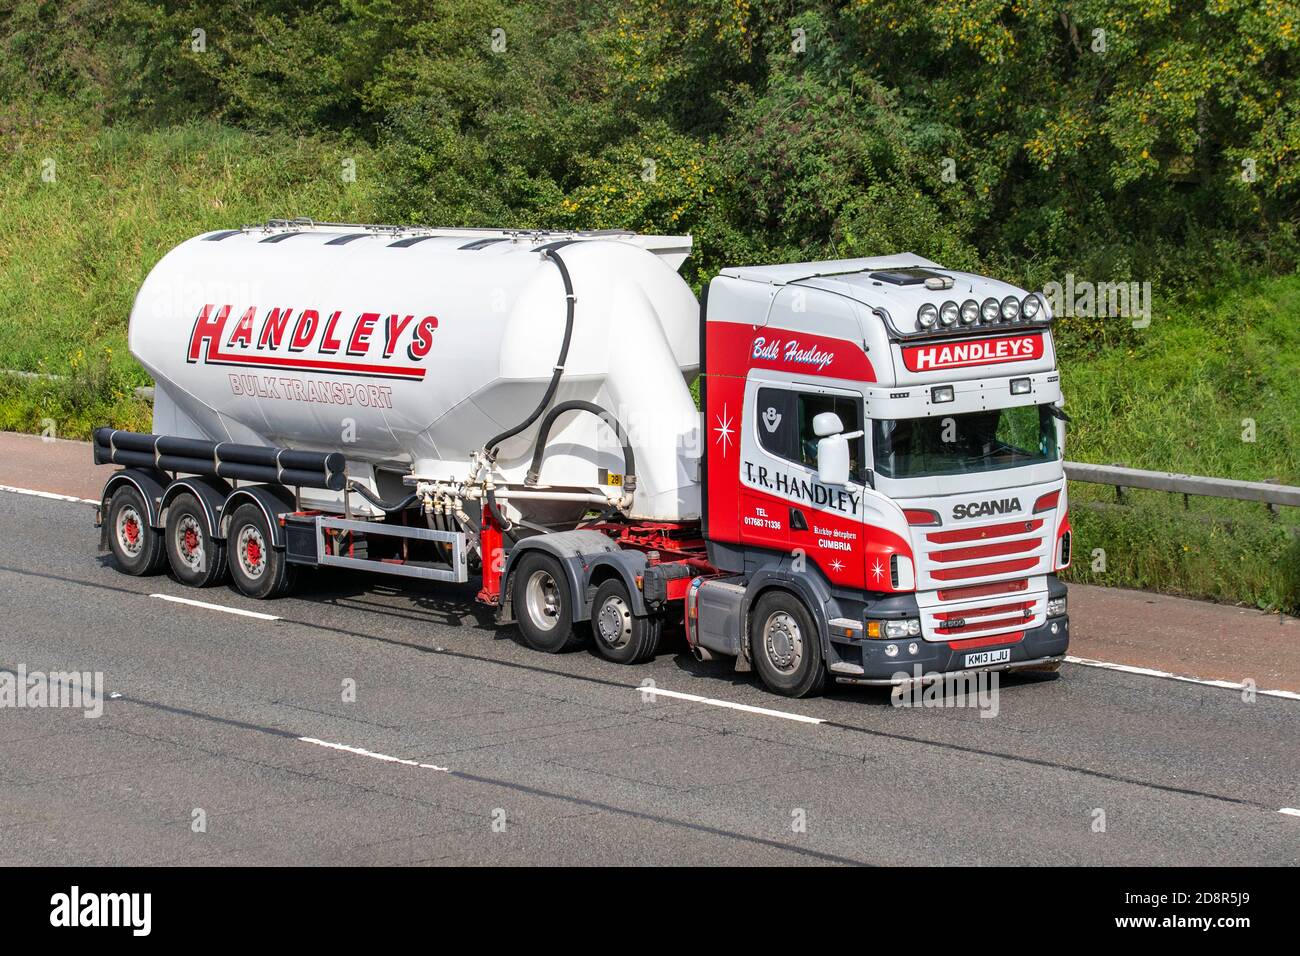 T R Hanley Bulk Haulage delivery trucks, lorry, heavy-duty vehicles,transportation, truck, cargo carrier, Scania R500 vehicle, European commercial transport industry HGV, M6 at Manchester, UK Stock Photo